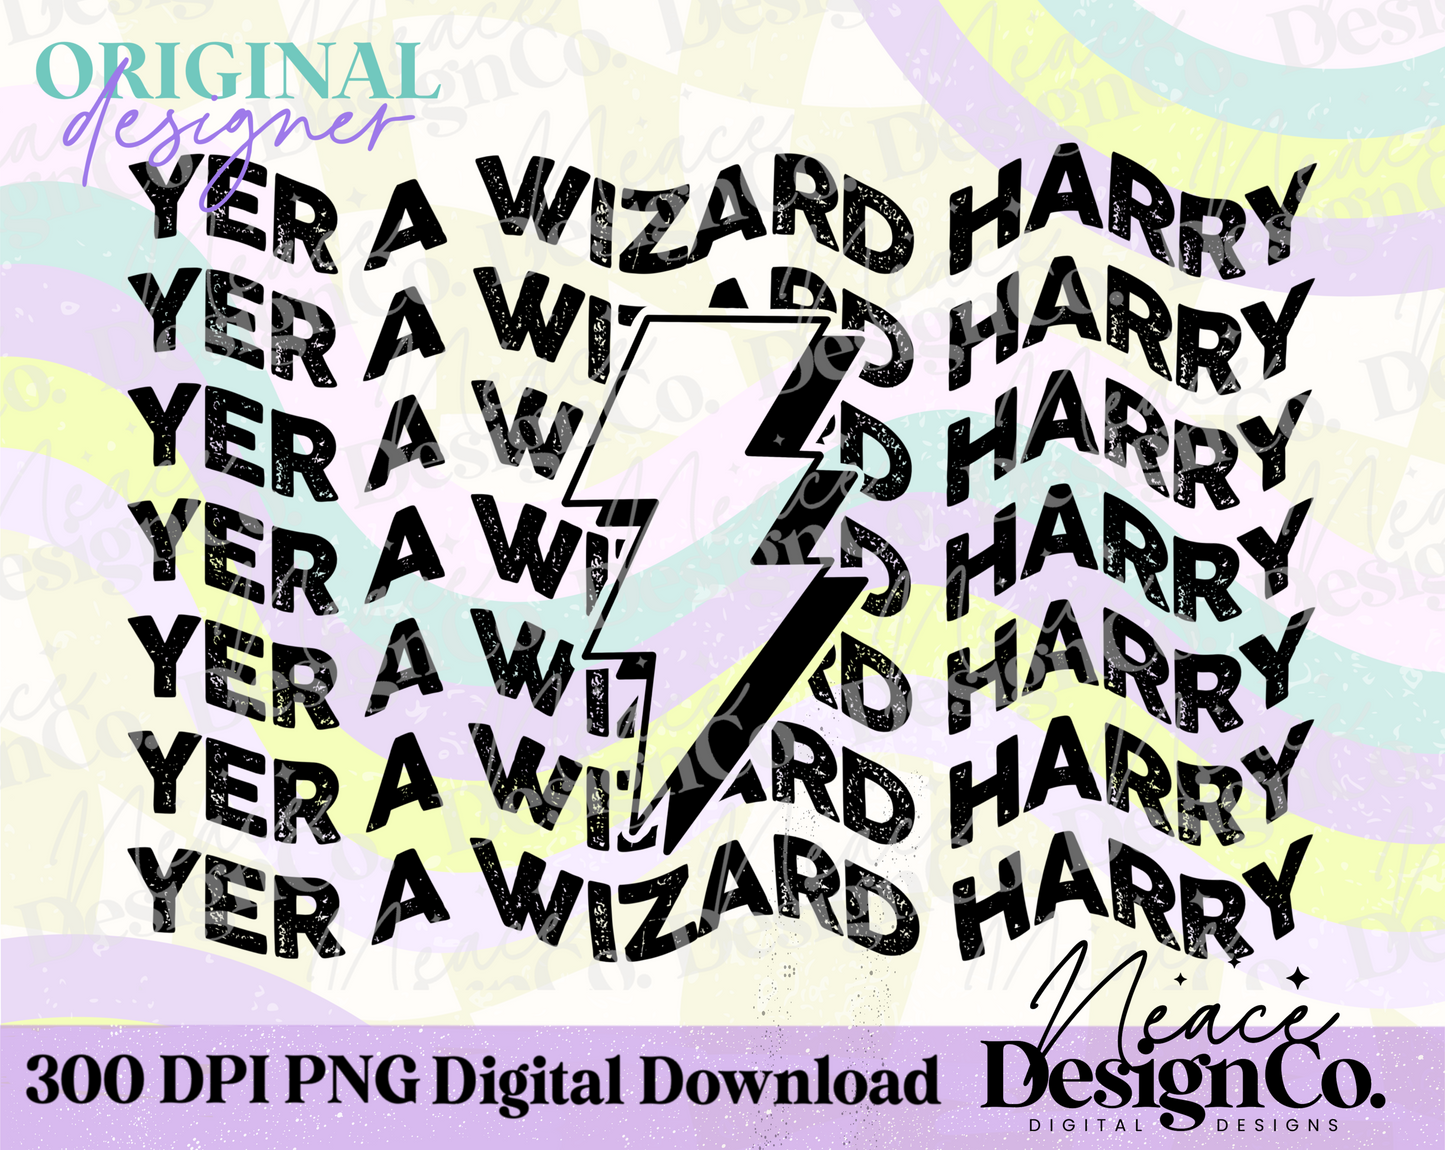 Yer A Wizard Harry Digital PNG